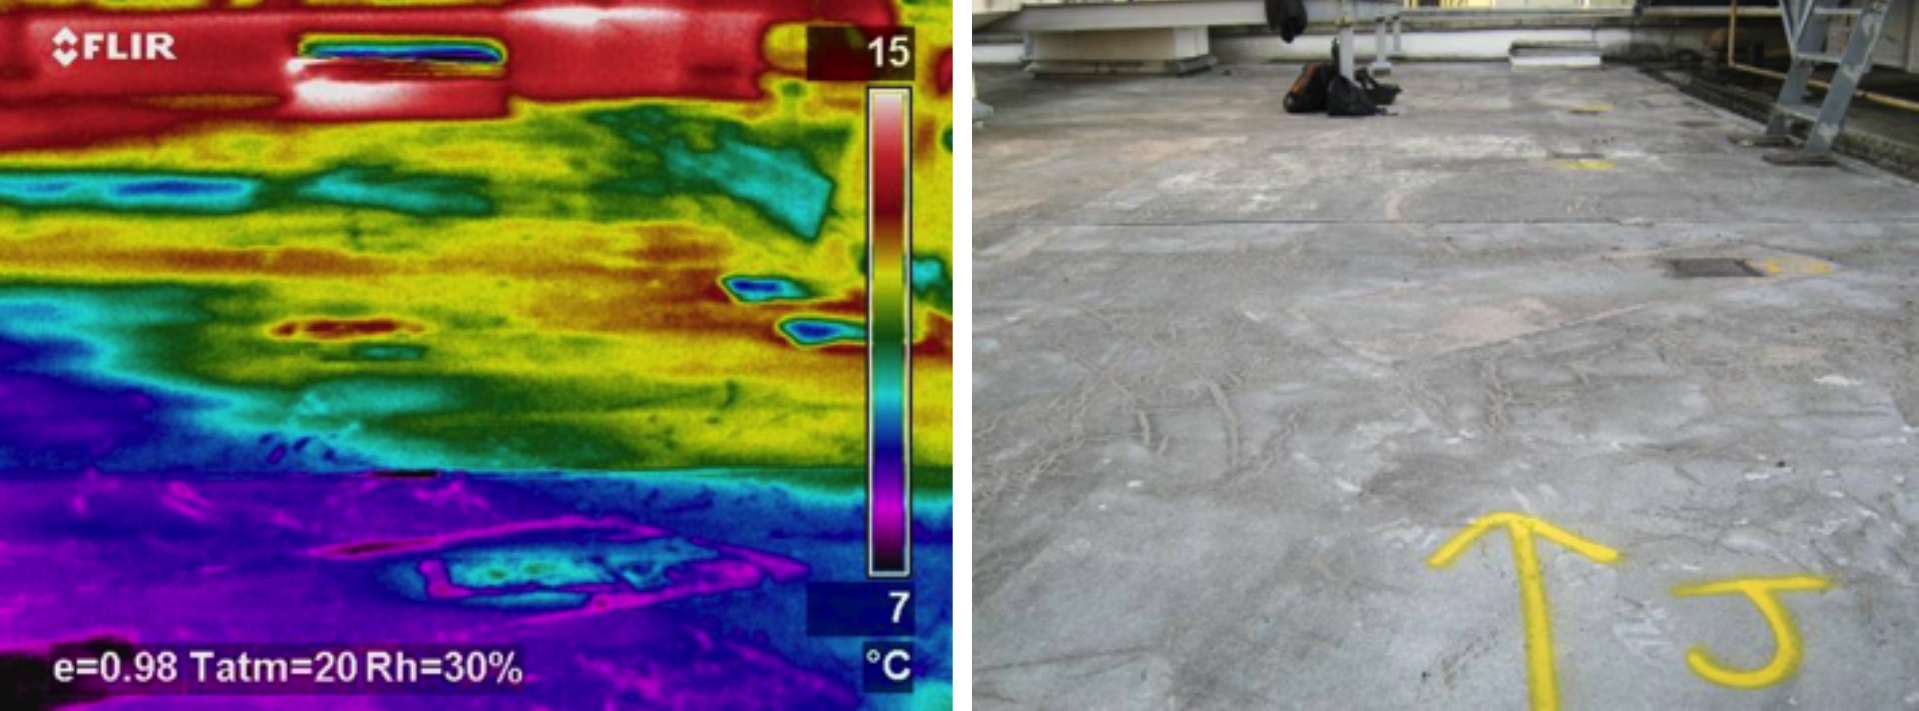  colorful Thermal Image showing Moisture on a roof